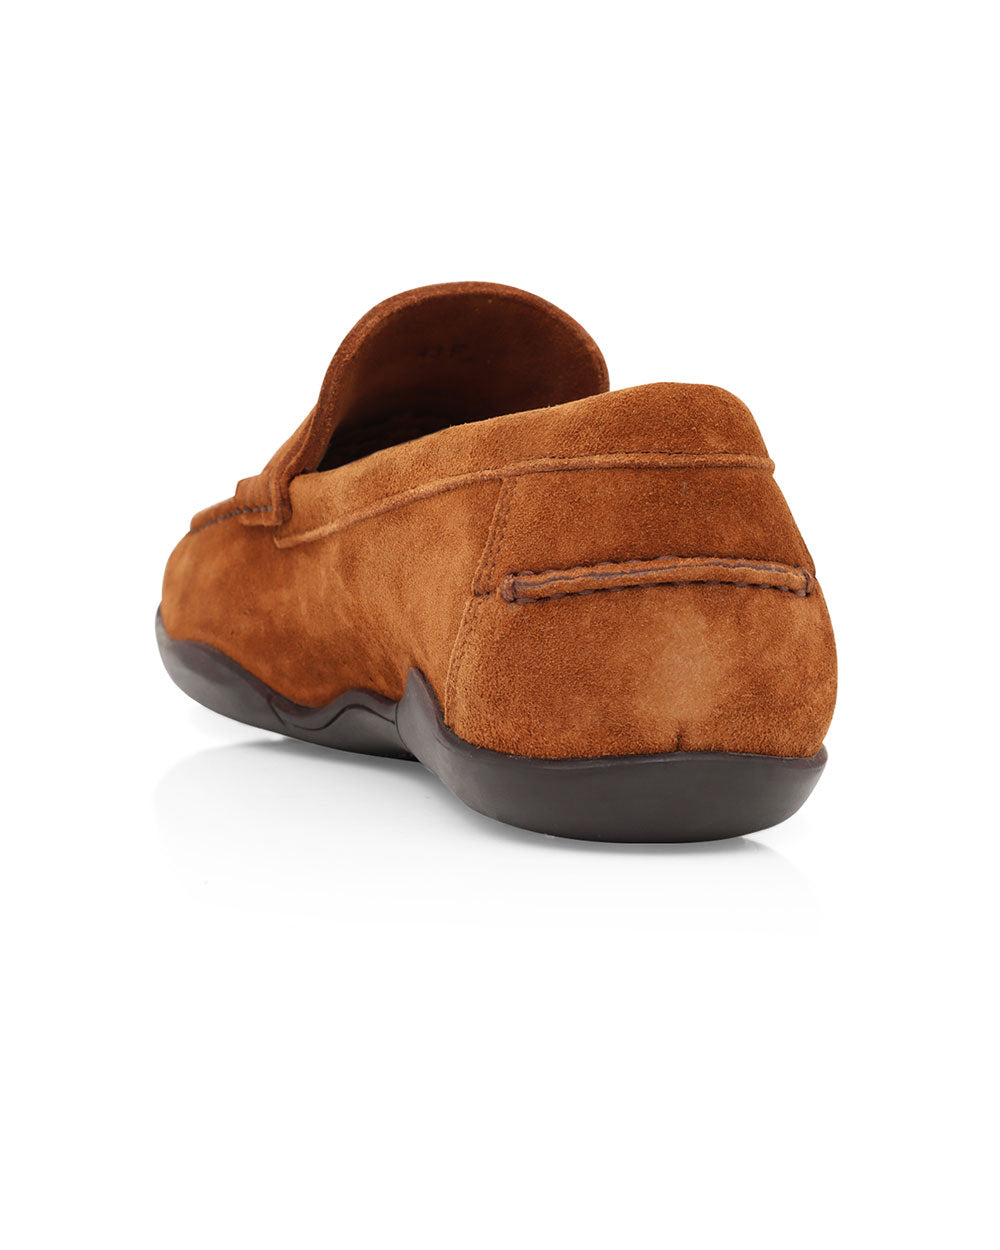 Suede Basel Kudu Penny Loafer in Tobacco